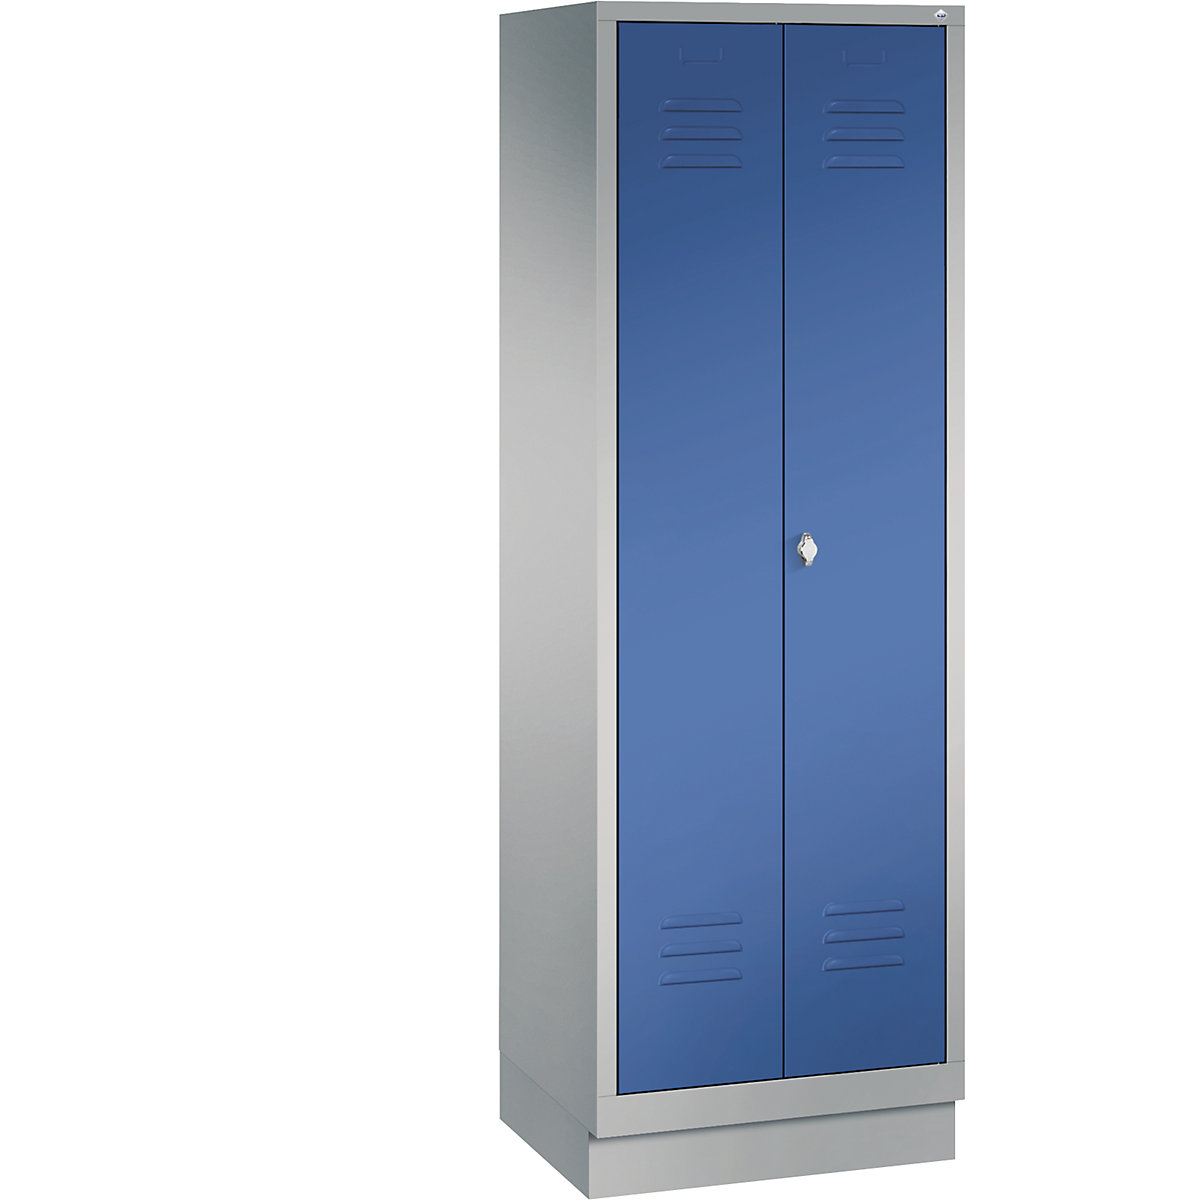 CLASSIC storage cupboard with plinth, doors close in the middle – C+P, 2 compartments, compartment width 300 mm, white aluminium / gentian blue-11